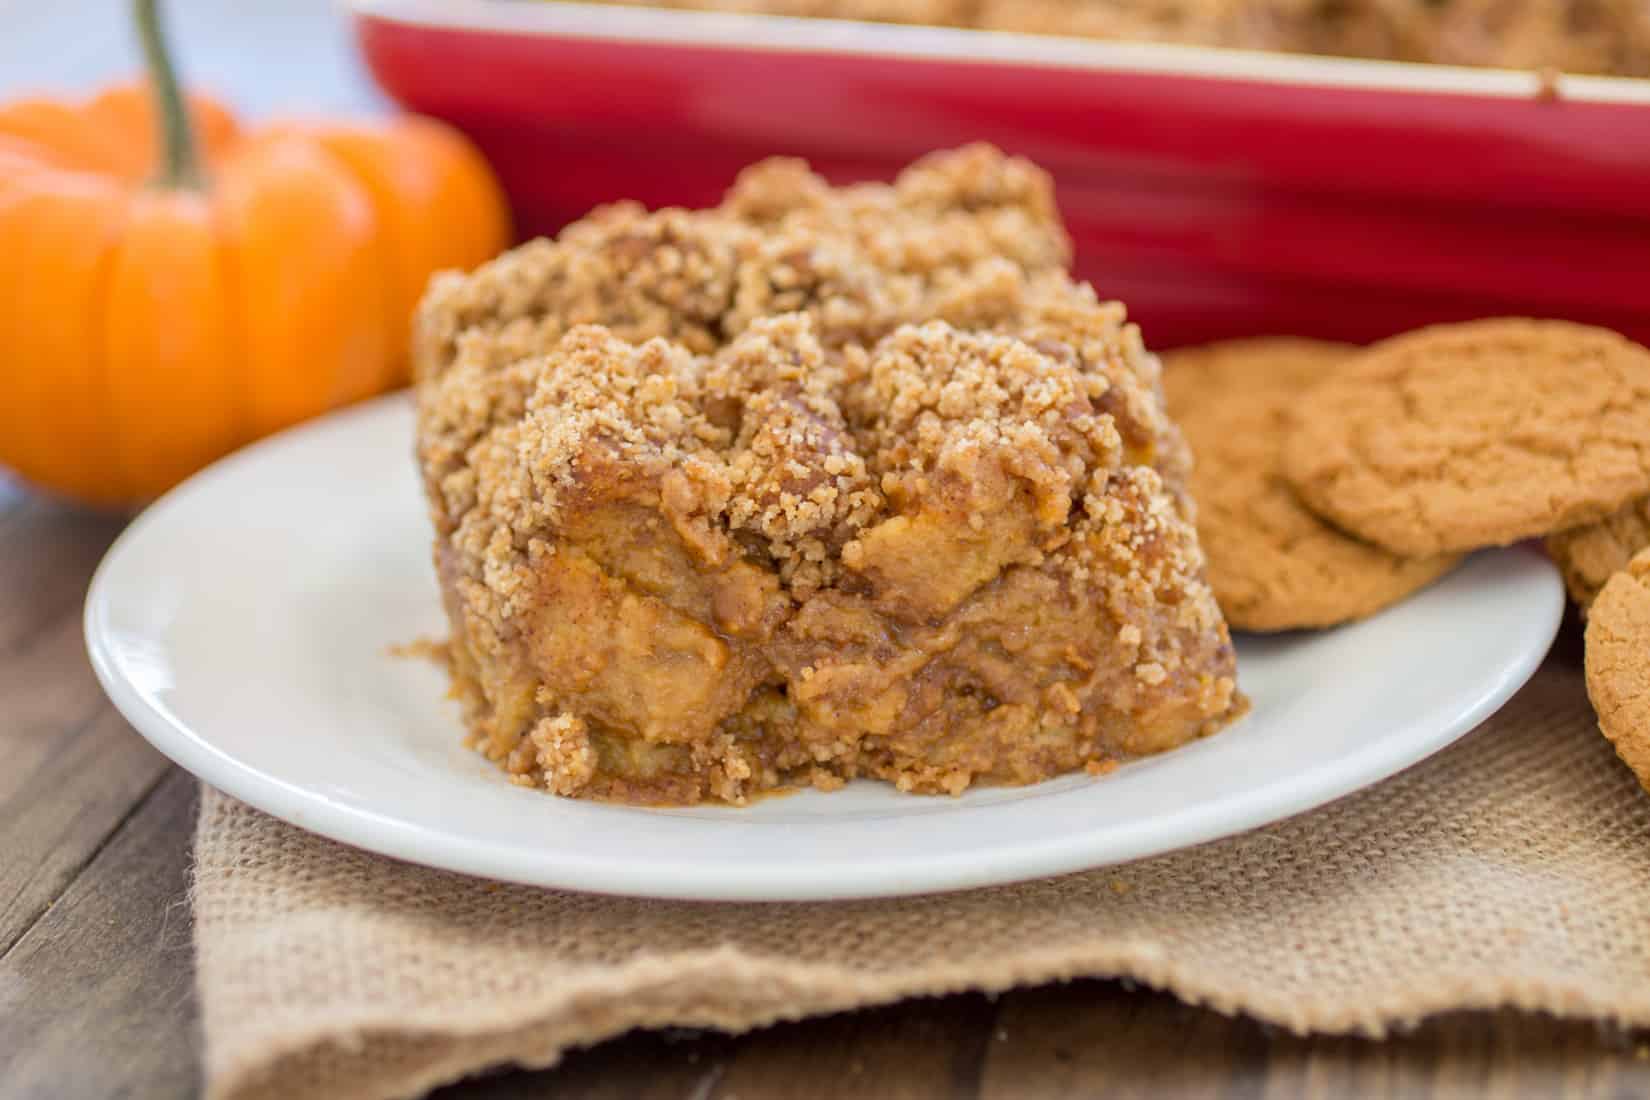 This melt-in-your-mouth bread pudding tastes like pumpkin pie but with an added spiced flair from the gingersnaps baked inside in the sweet and spicy crumble on top! - Sprinkle Some Sugar